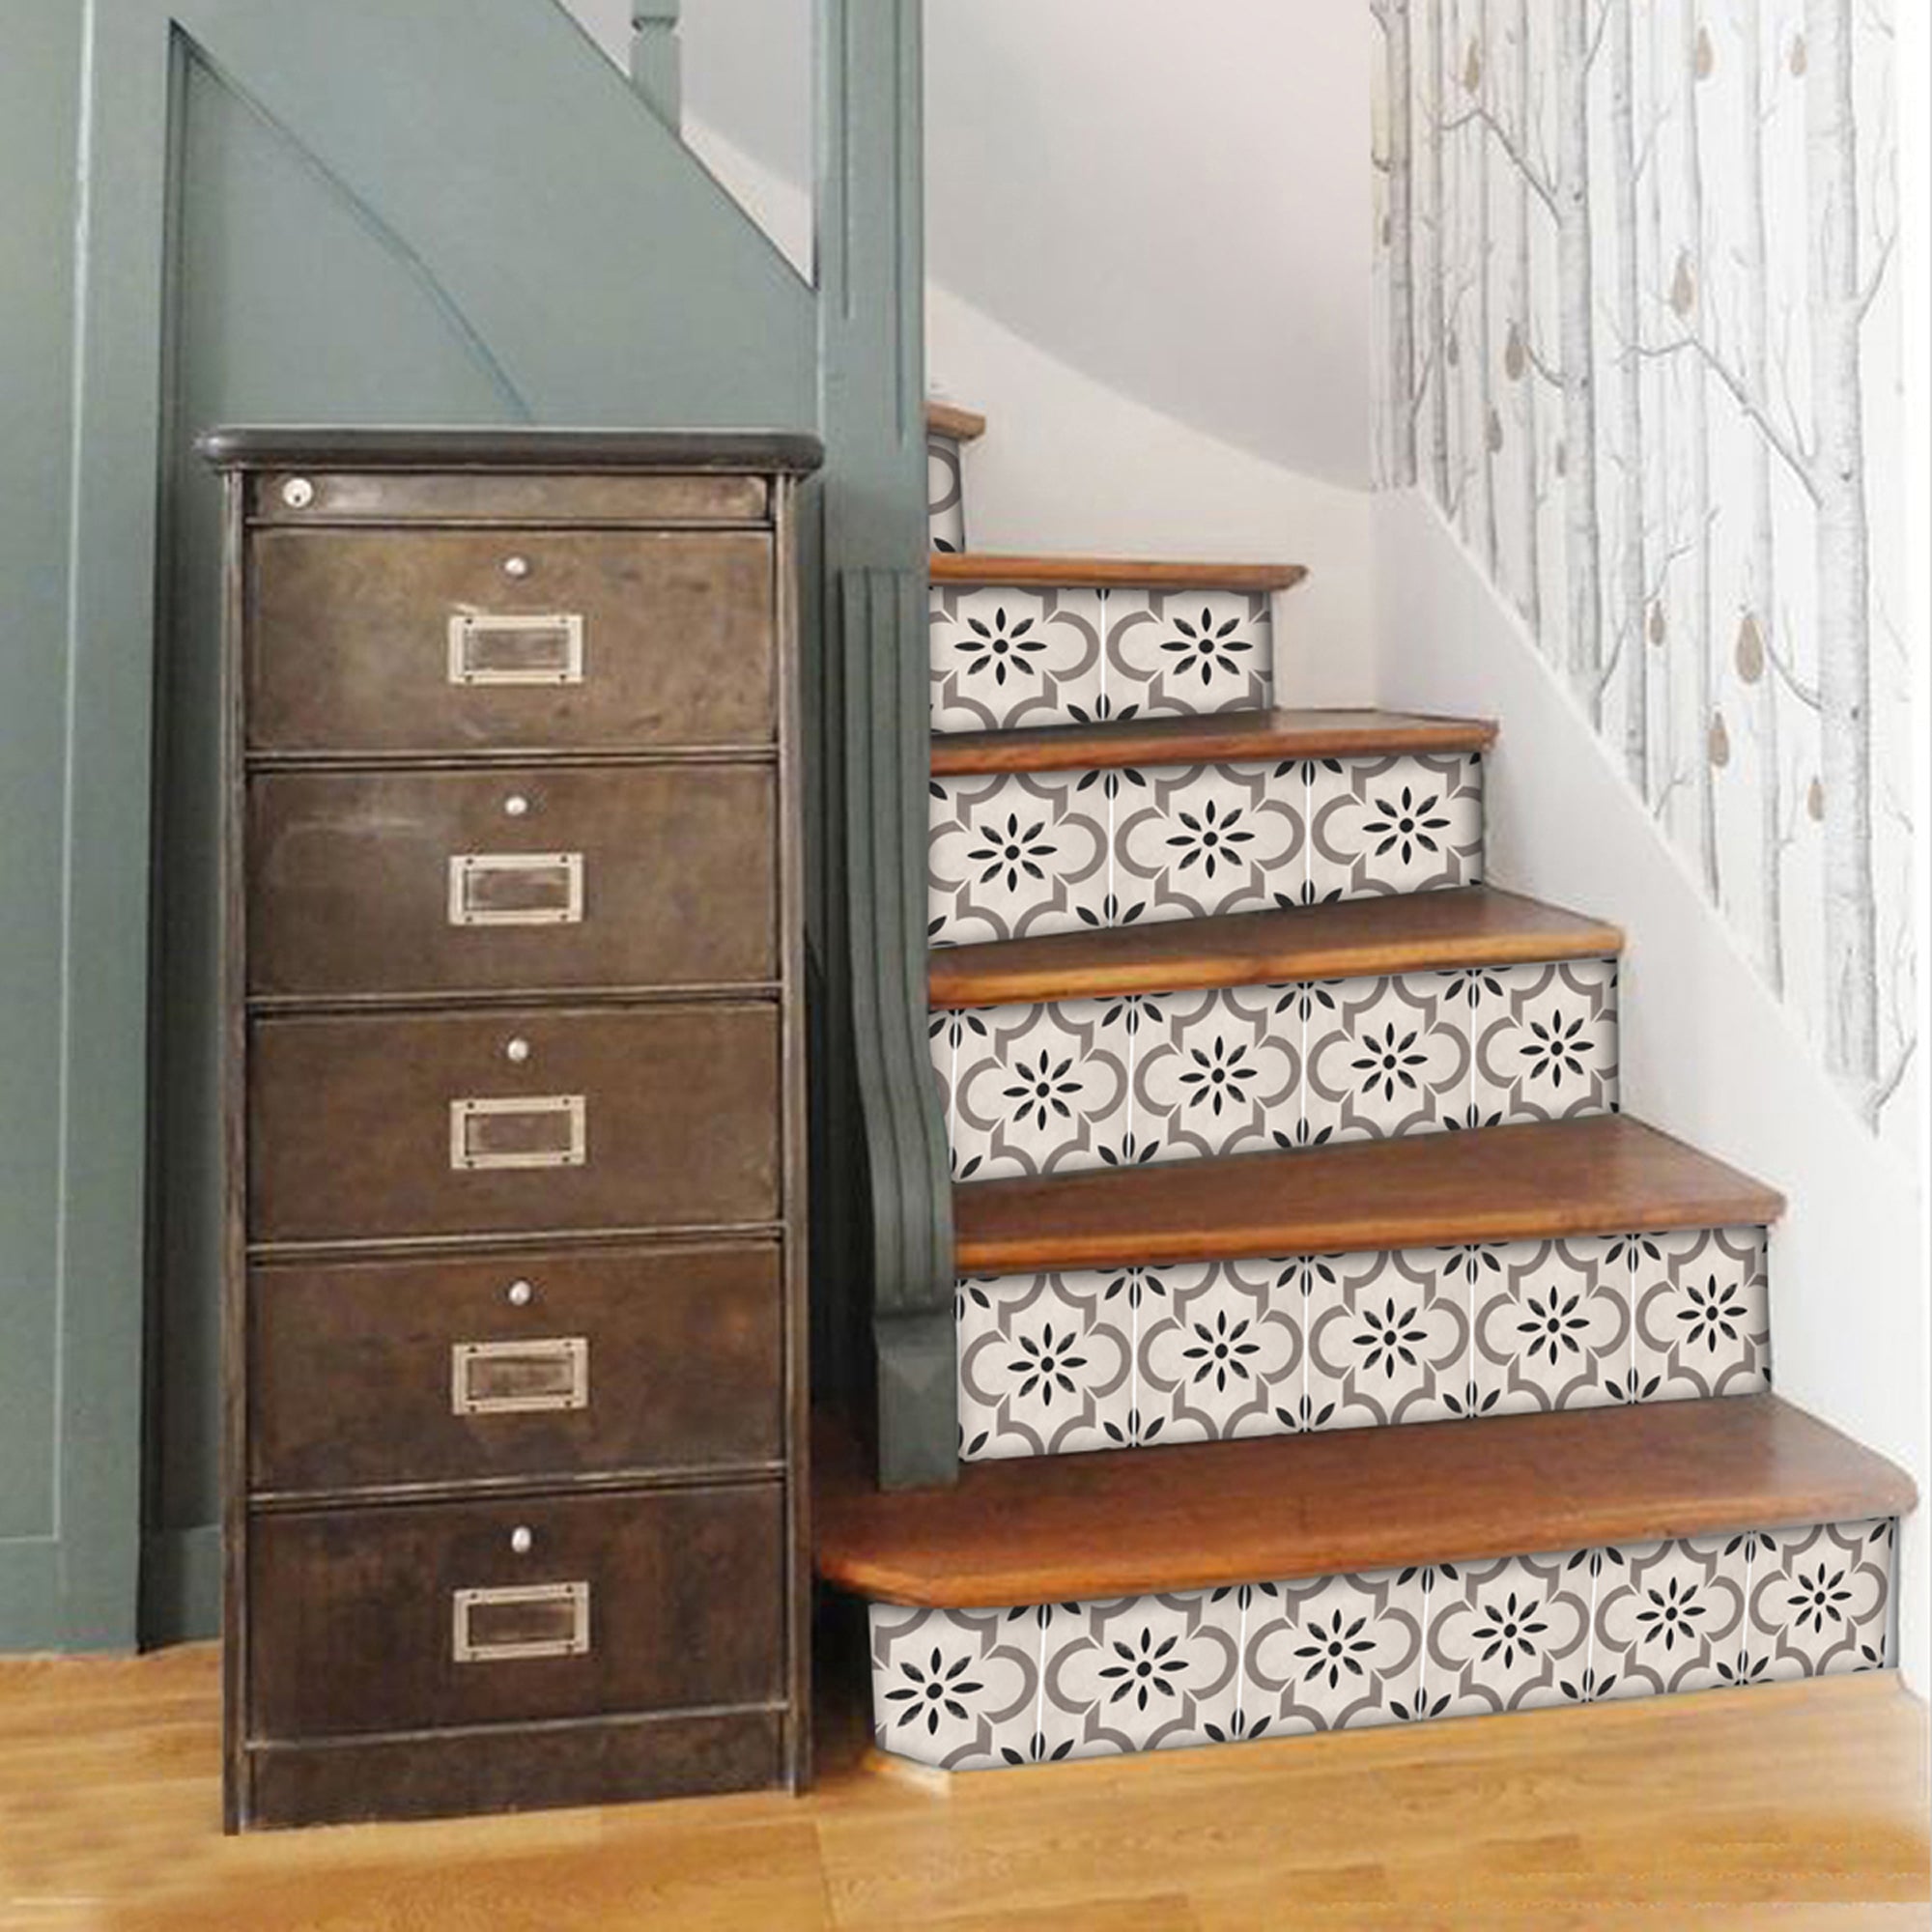 PROMO! Marta Stair Riser Stickers - 6 strips in 16.3 cm height x 120 cm long